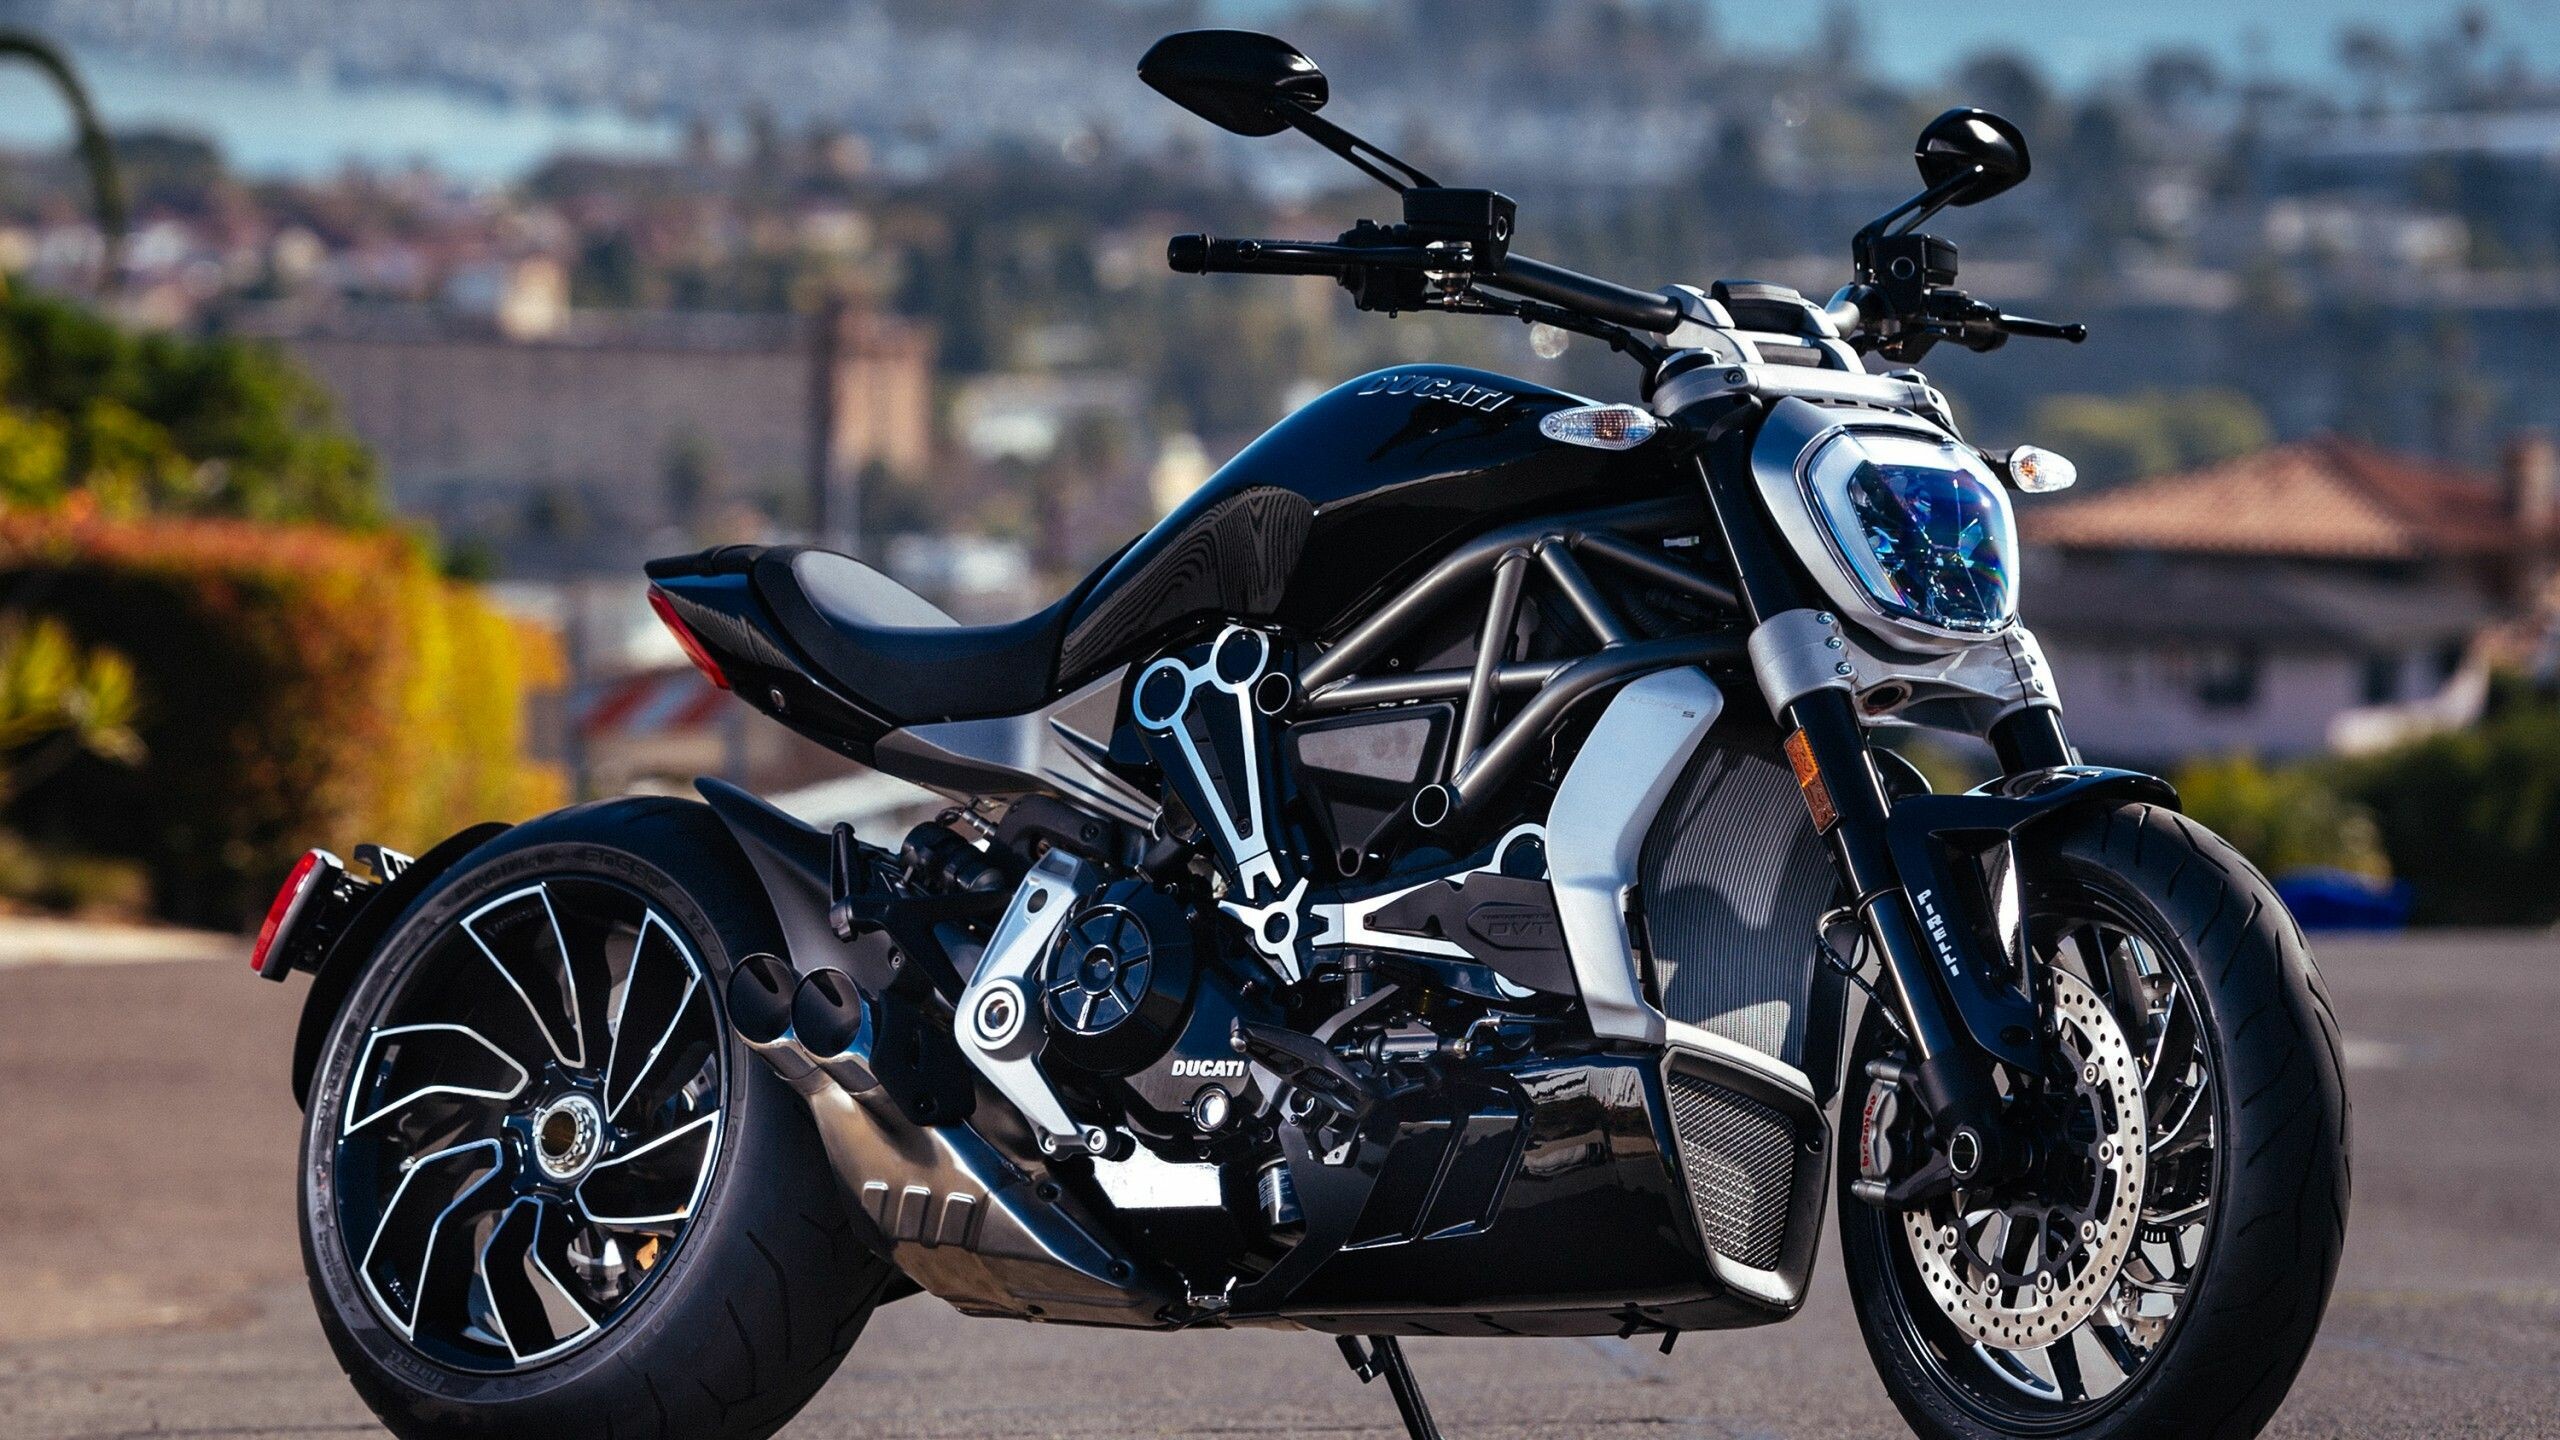 Bike: Ducati Diavel, debuted in November 2010 at the EICMA motorcycle show in Milan. 2560x1440 HD Background.